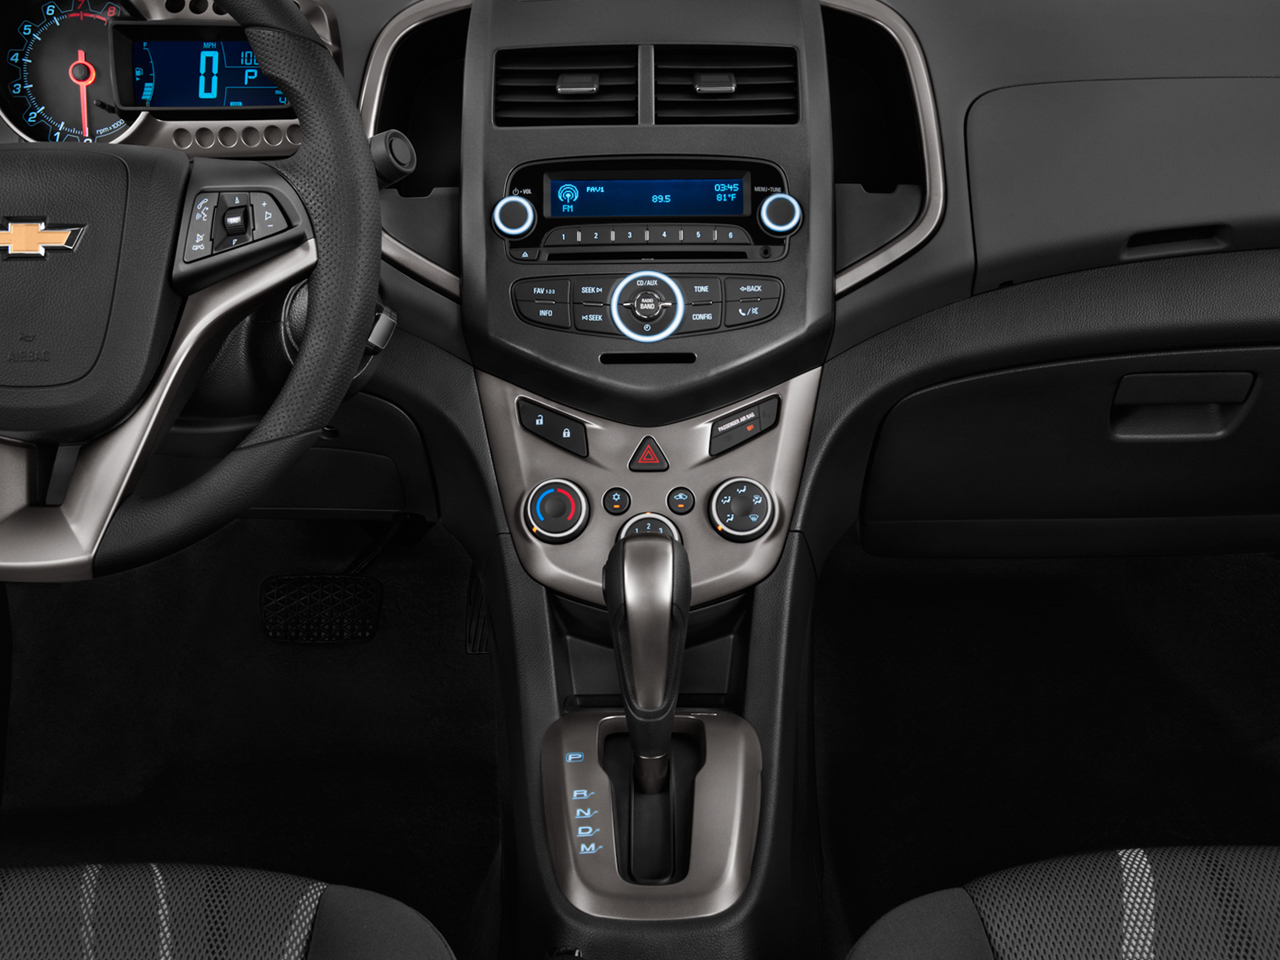 Chevrolet Sonic Rs Sedan Interior Image Gallery Pictures